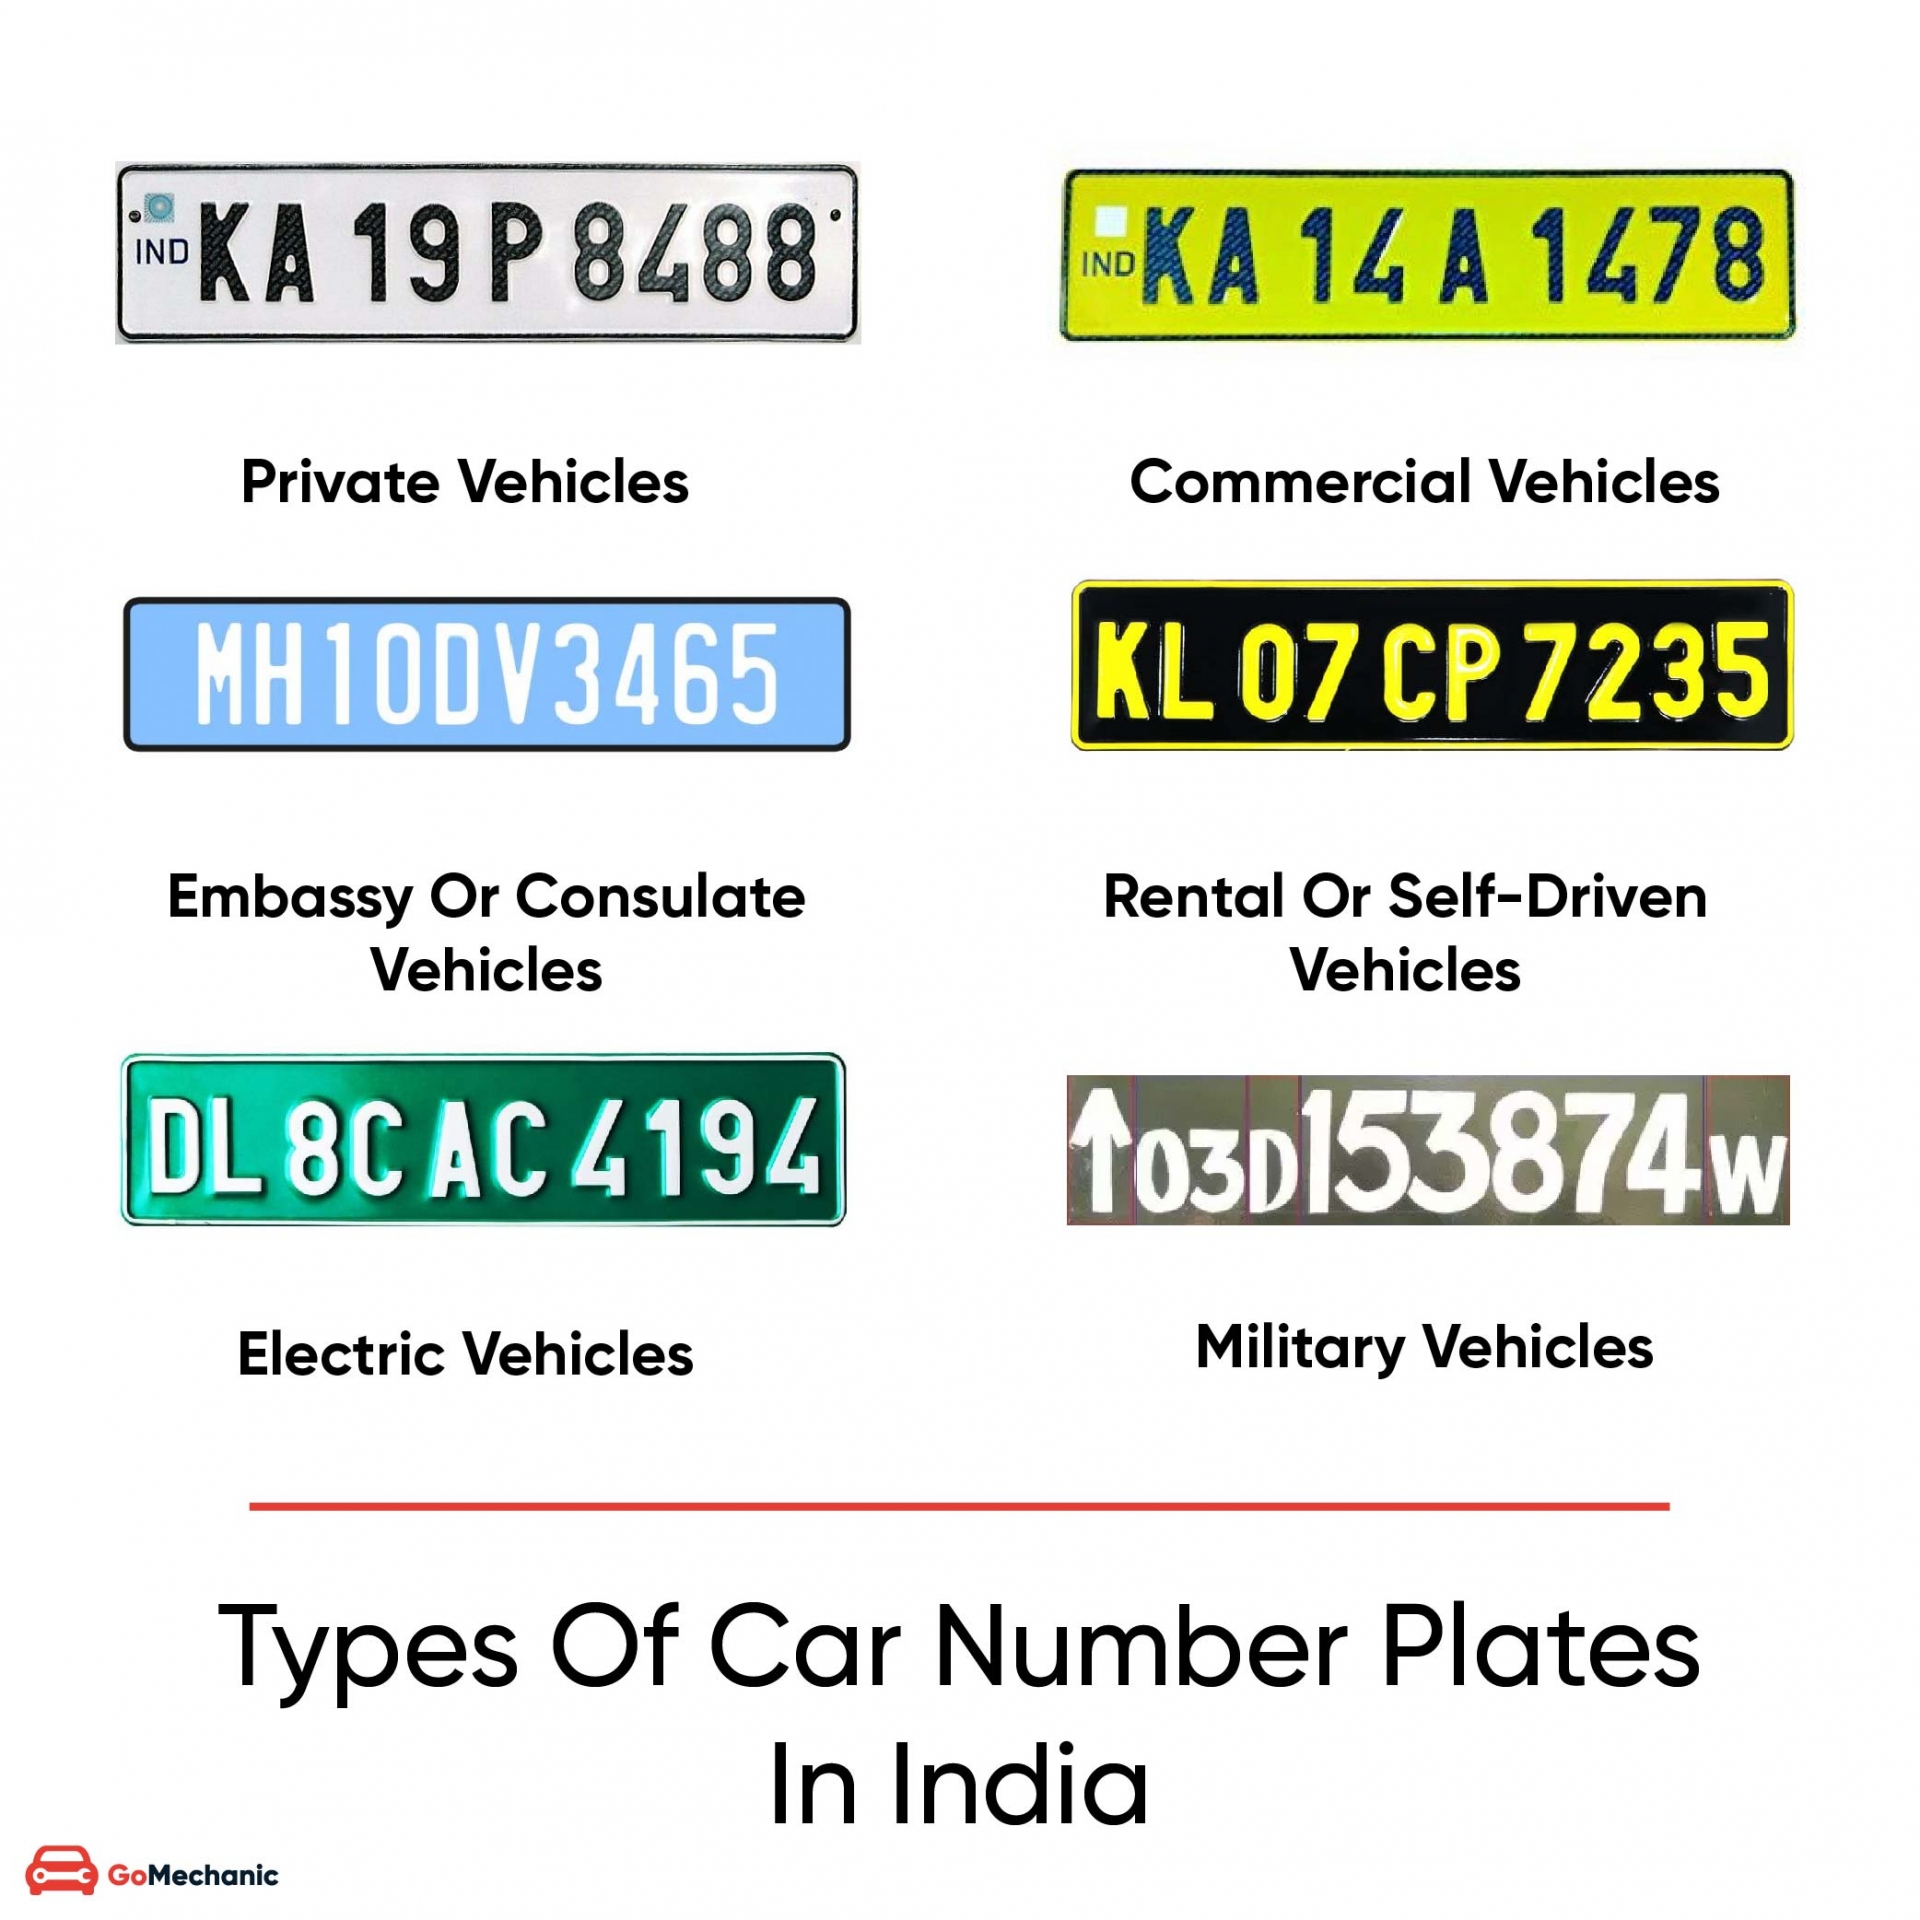 Best Free Sites to Check The Car Owner by License Plate Number in India